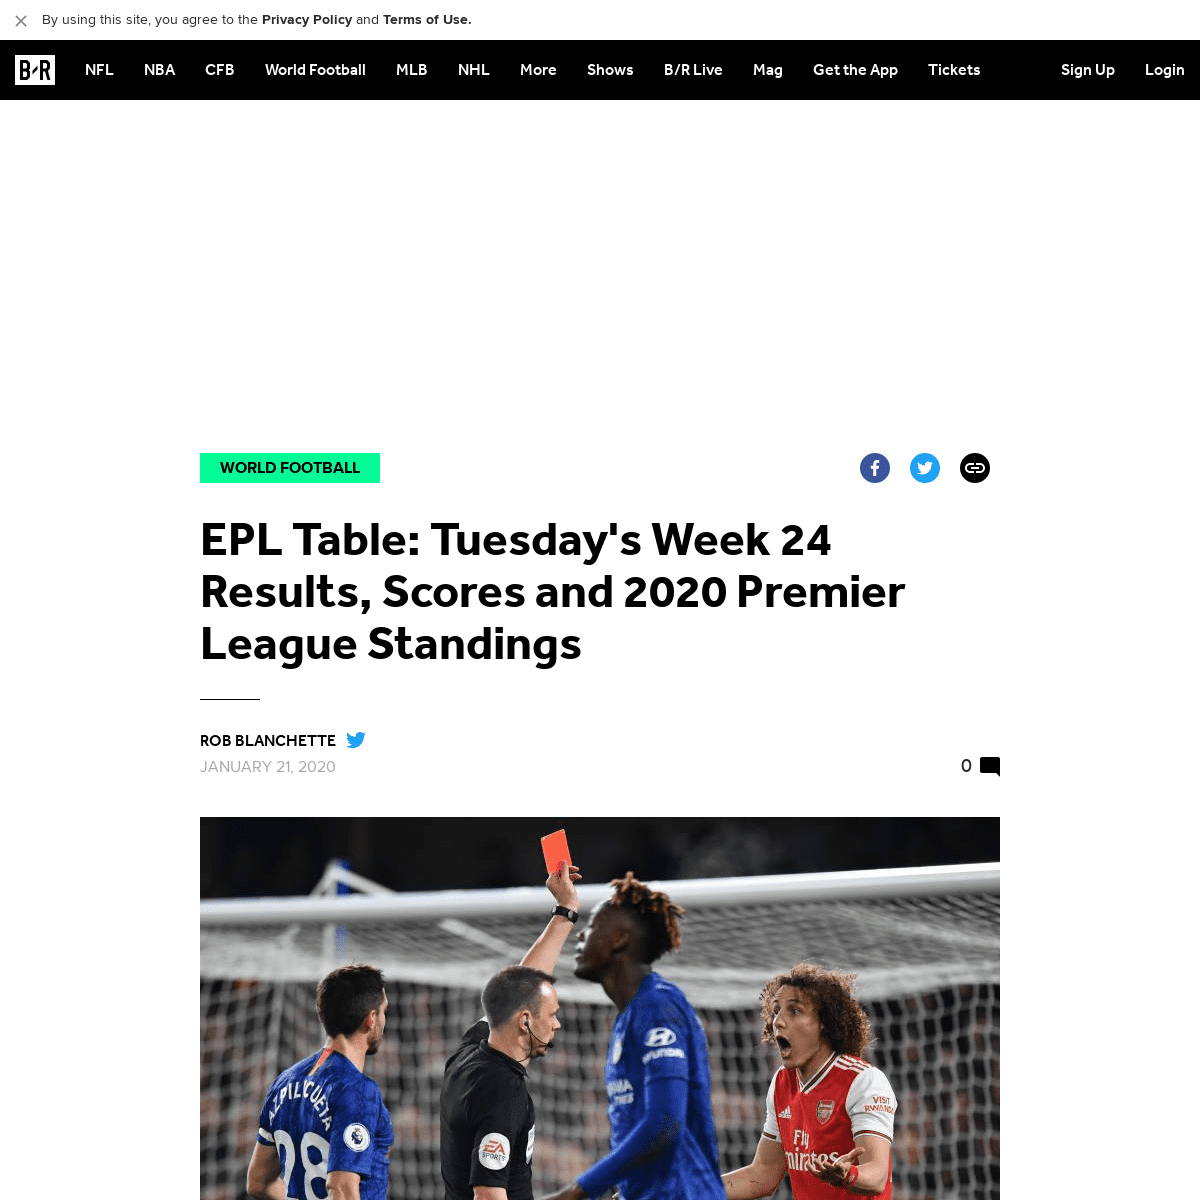 A complete backup of bleacherreport.com/articles/2872466-epl-table-tuesdays-week-24-results-scores-and-2020-premier-league-stand